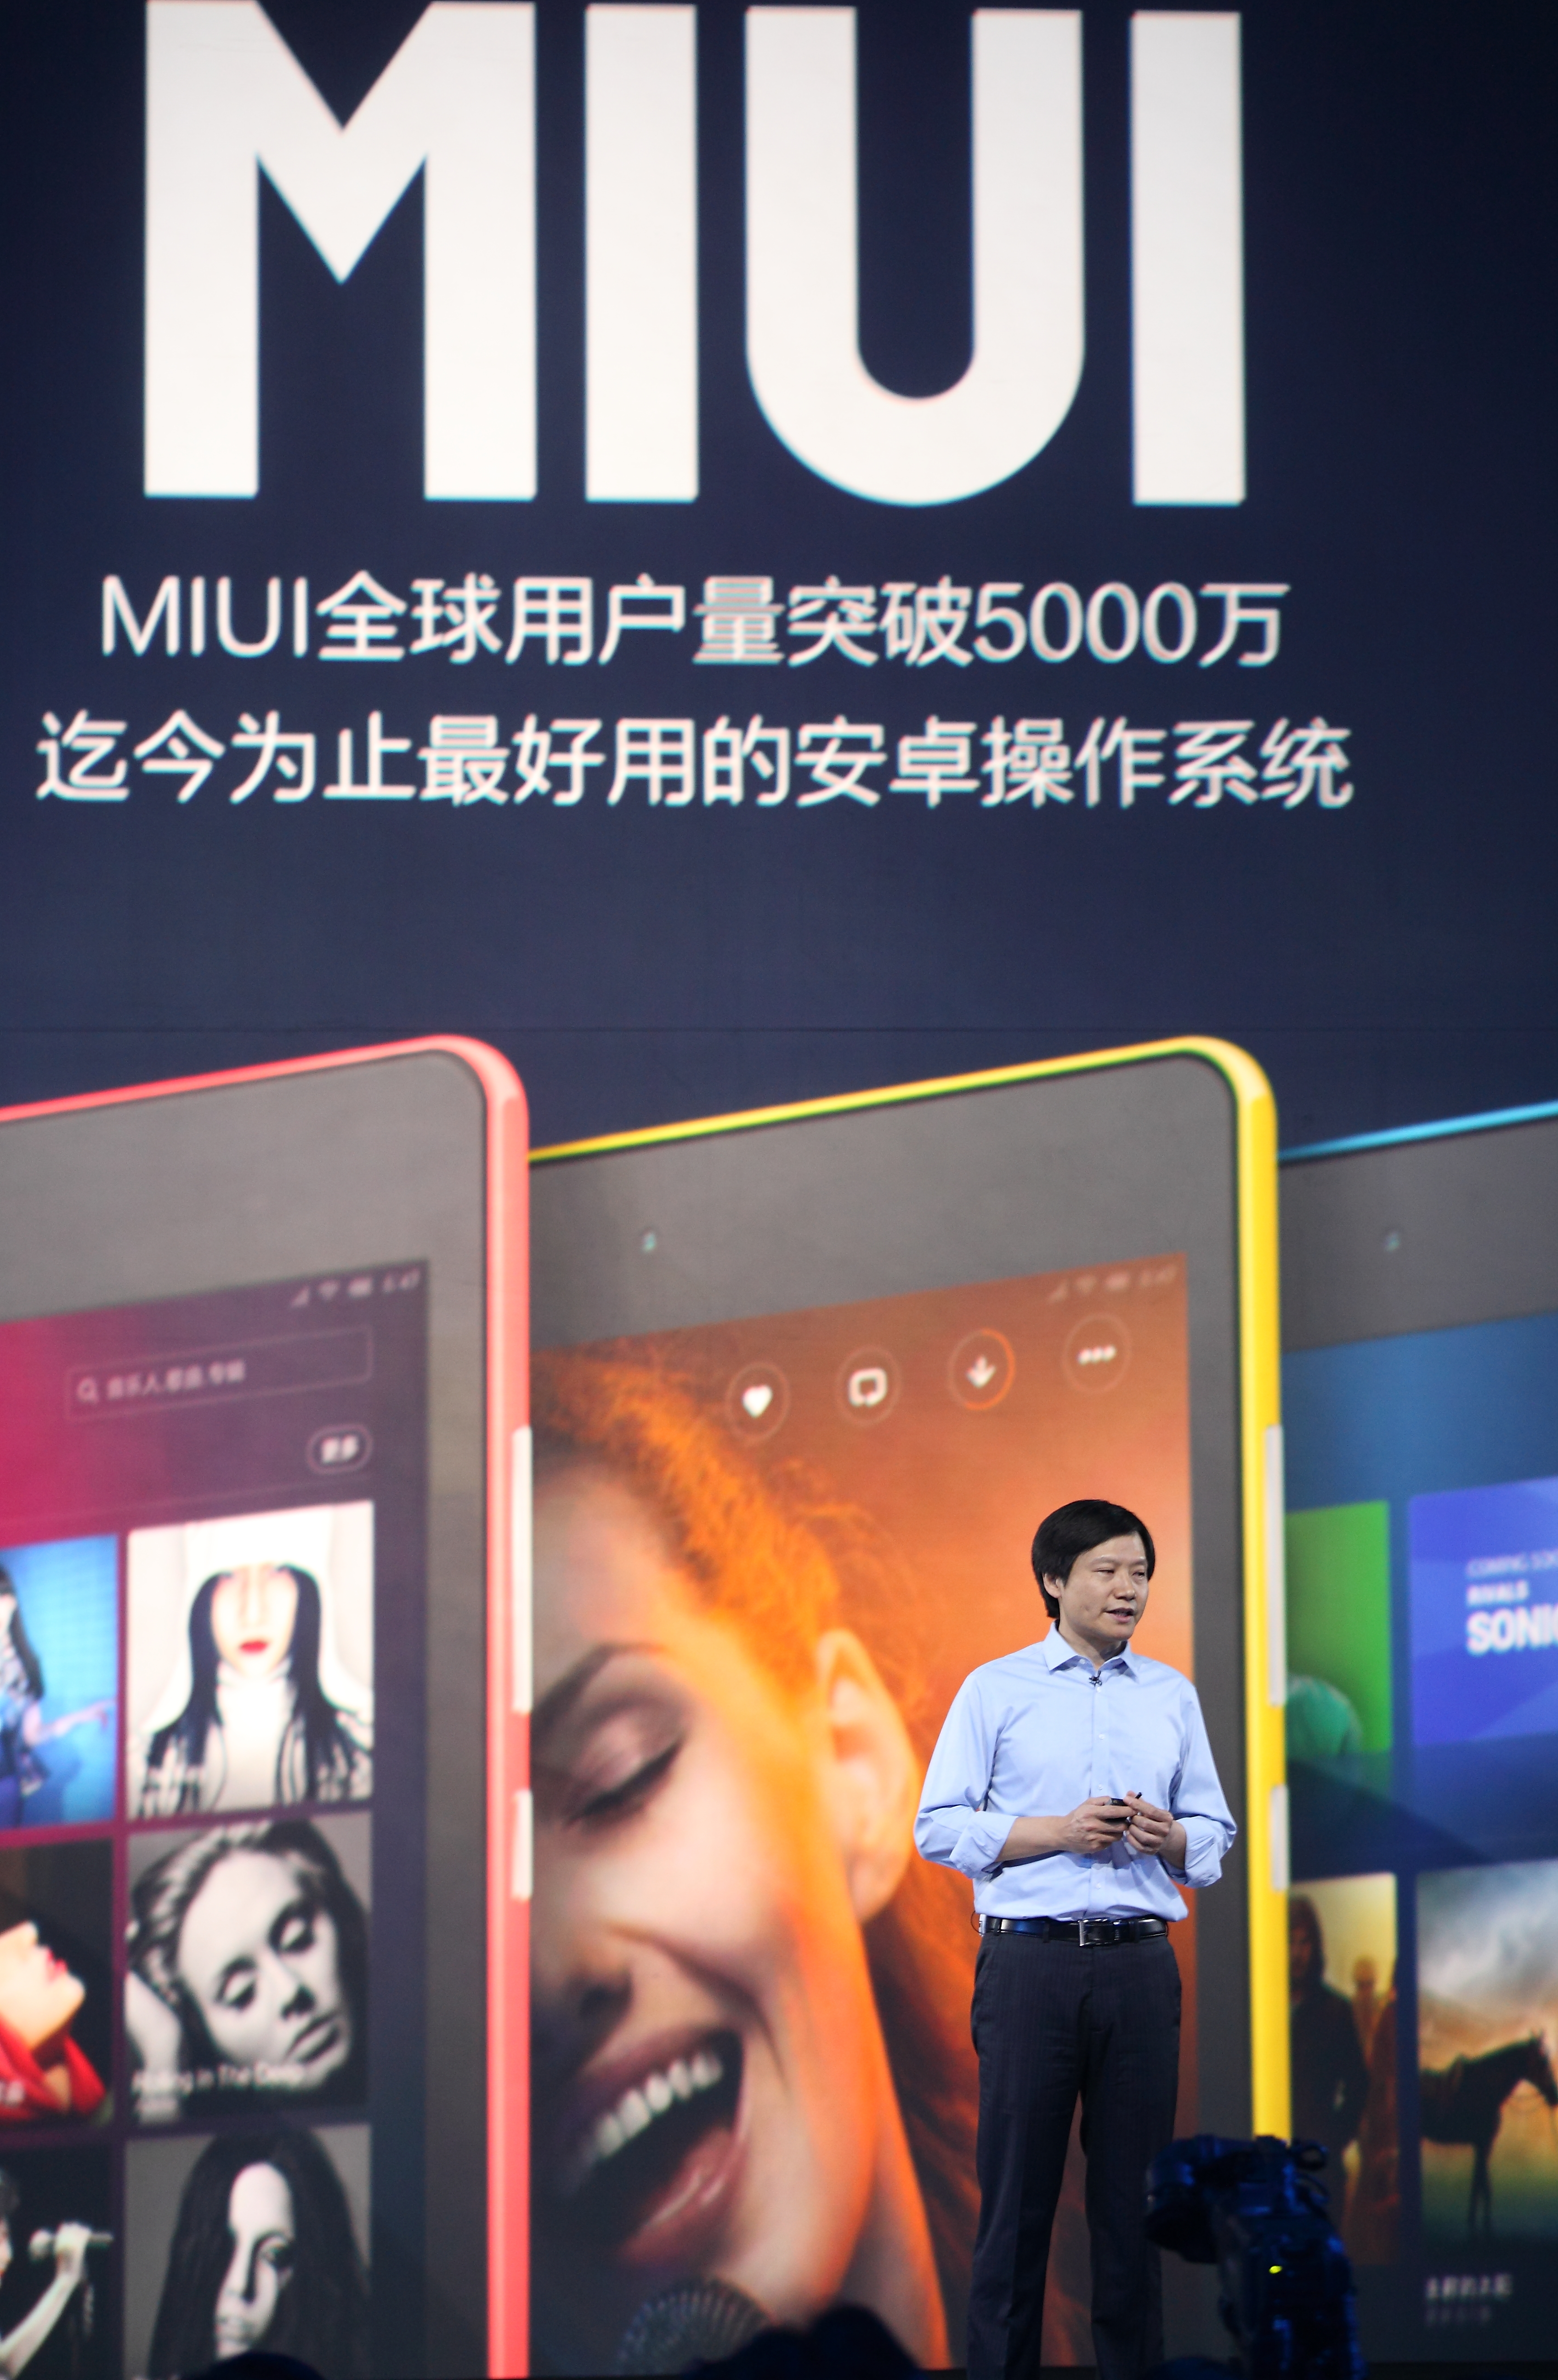 Xiaomi CEO Lei Jun speaks during a product launch on May 15, 2014 in Beijing, China. (ChinaFotoPress via Getty Images)